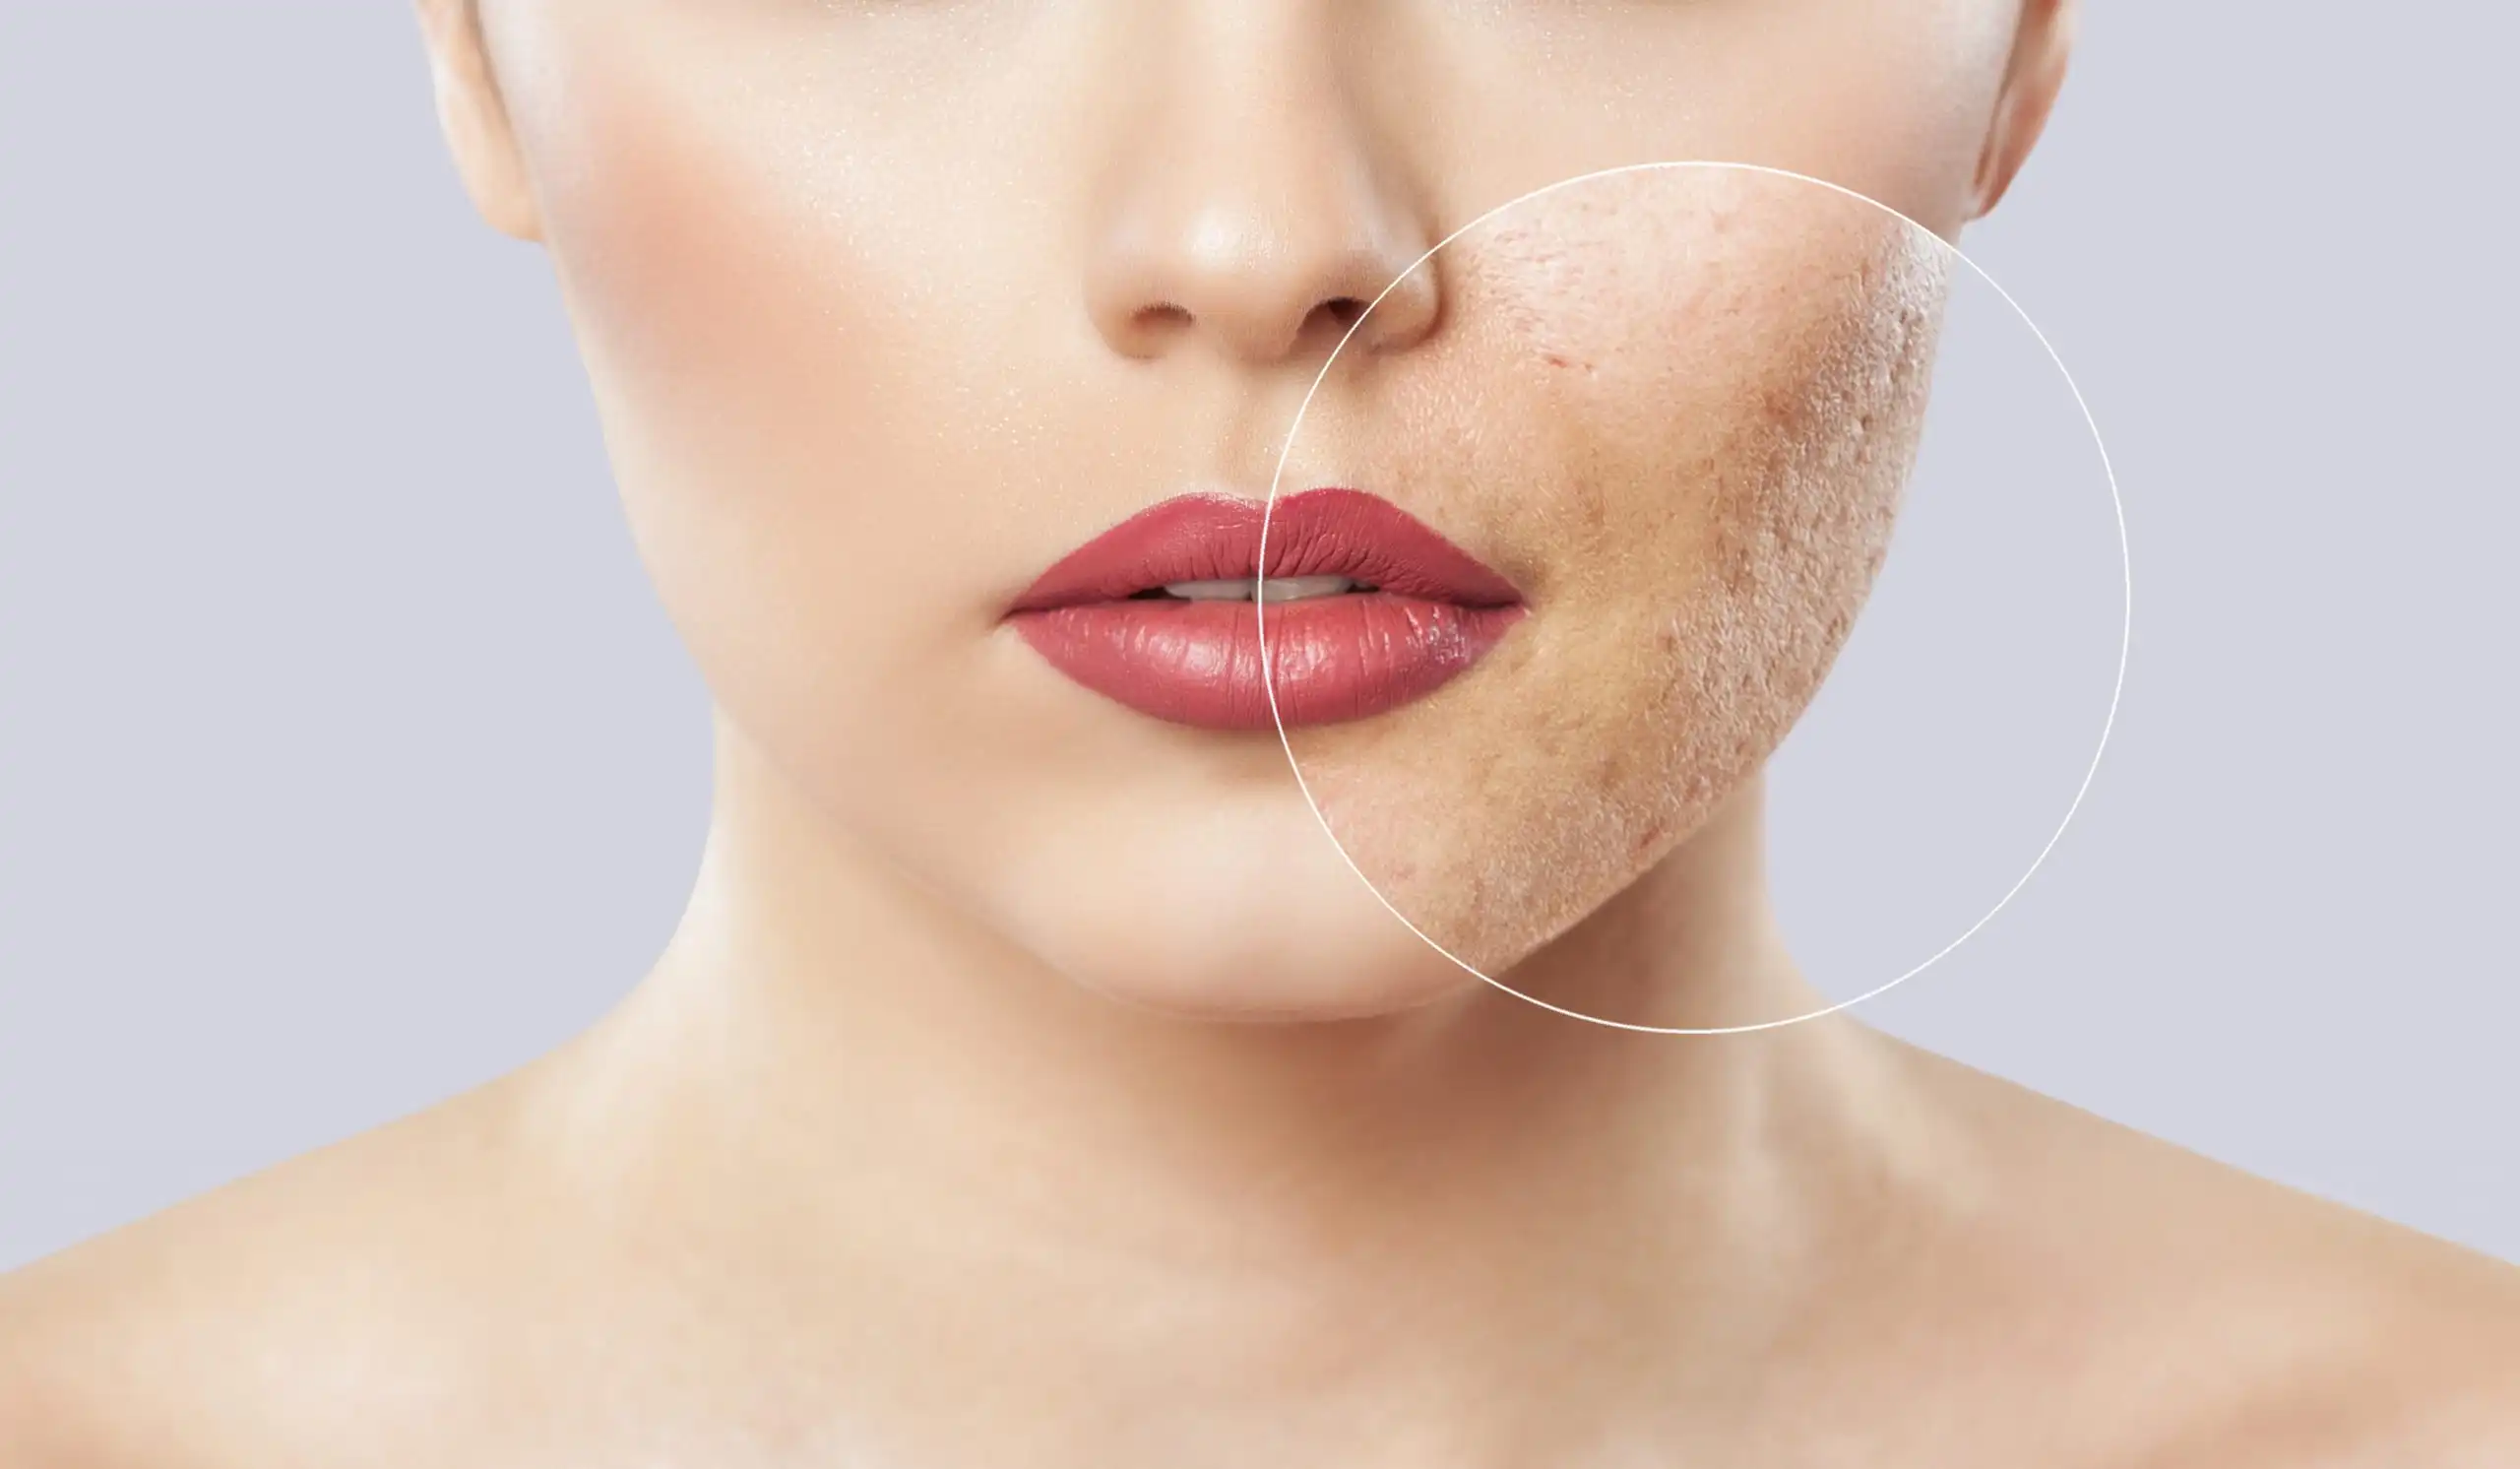 How a dermatologist can help with acne scarring